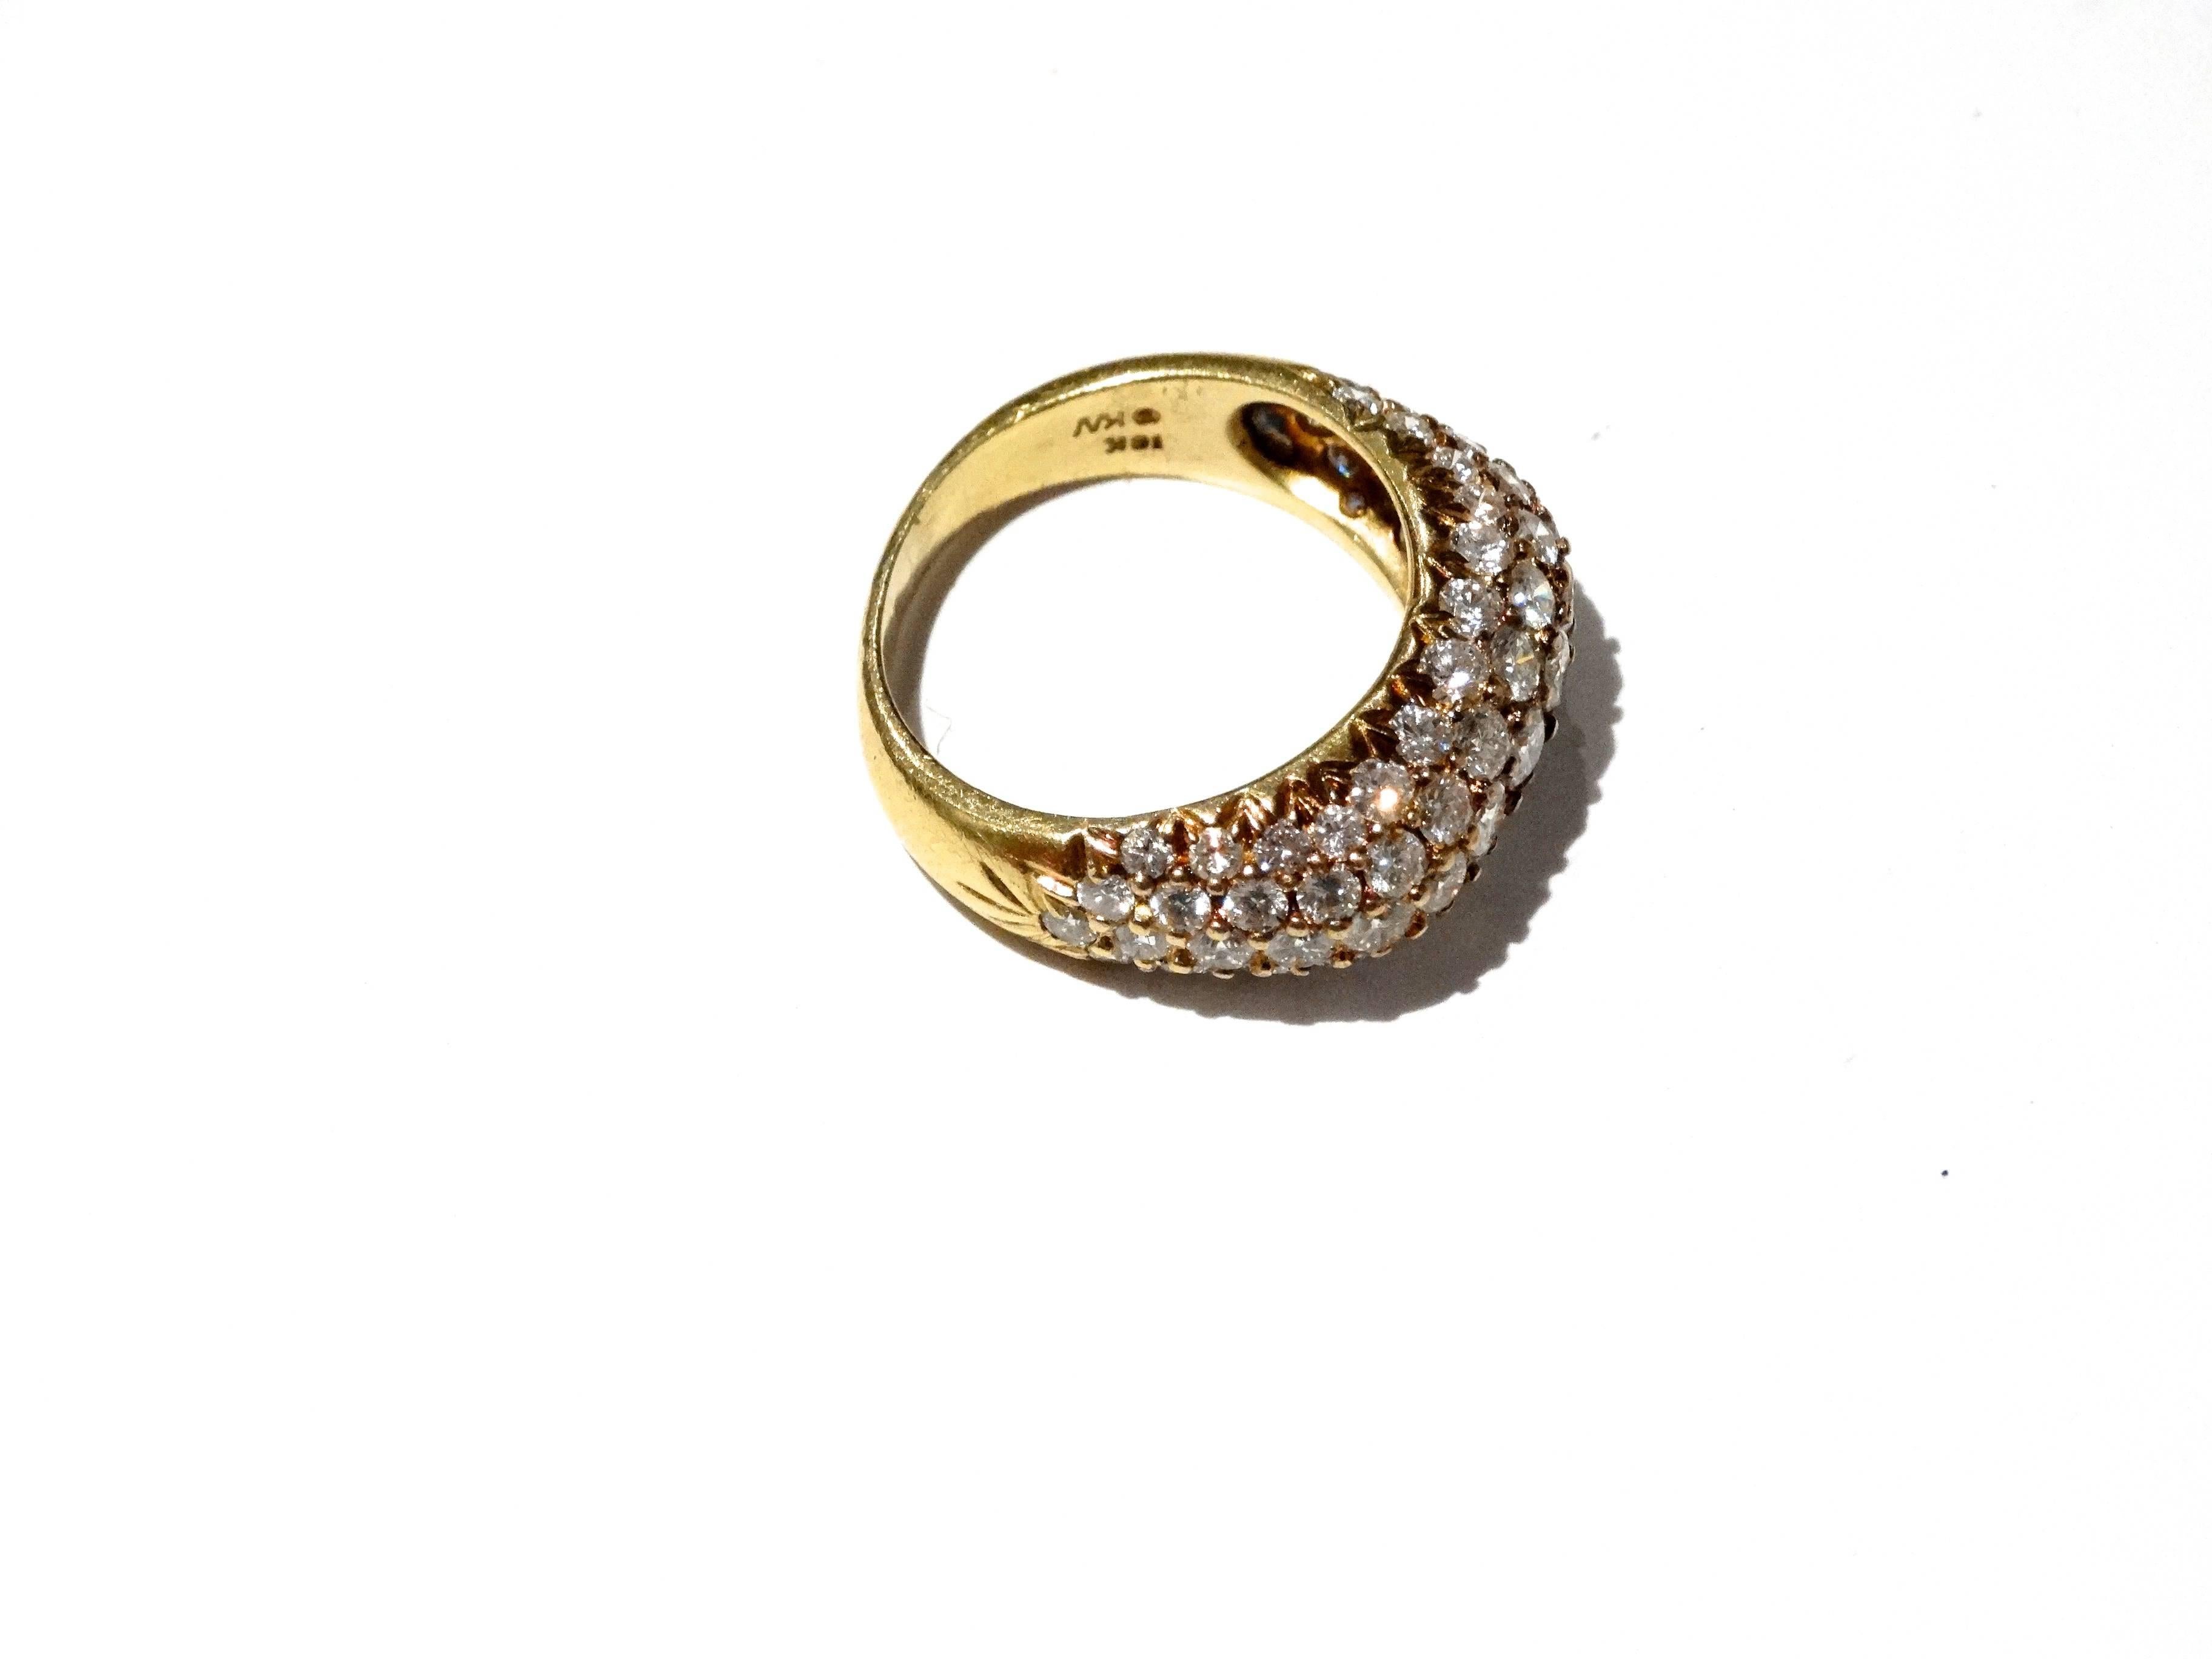 Beautiful ladies diamond dome ring designed by Kurt Wayne, this beautiful diamond ring is 14kt yellow gold diamond cluster dome ring contains five rows of sixty-nine (69) total brilliant cut diamonds, all pave set, varying in size fron approximately